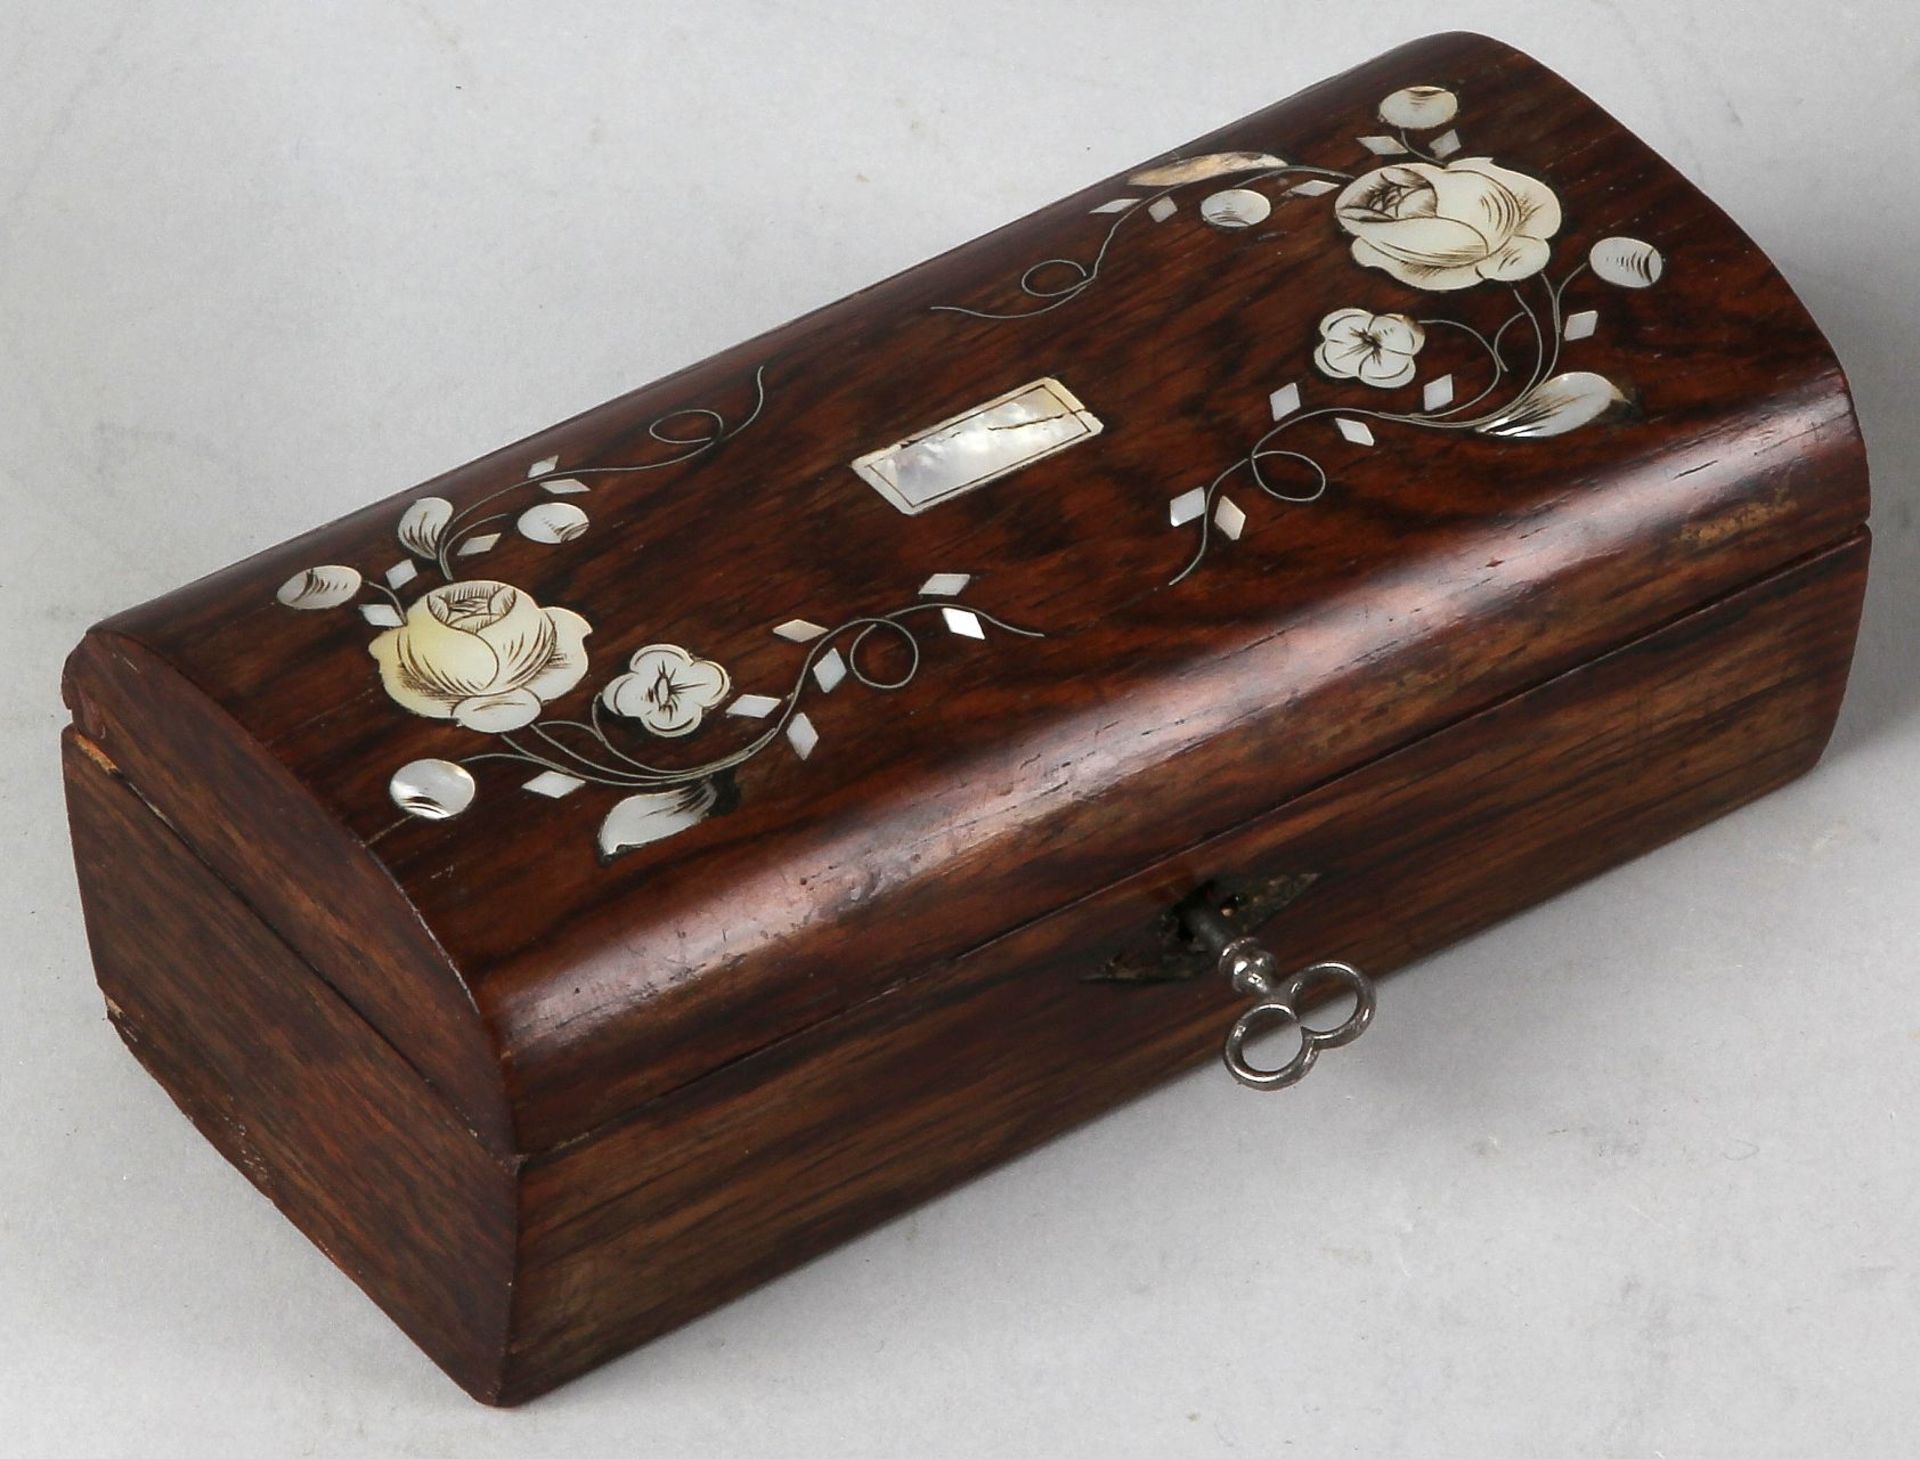 Antique rosewood spoon box with mother of pearl inlay, 19th century. Key fog batter. In good